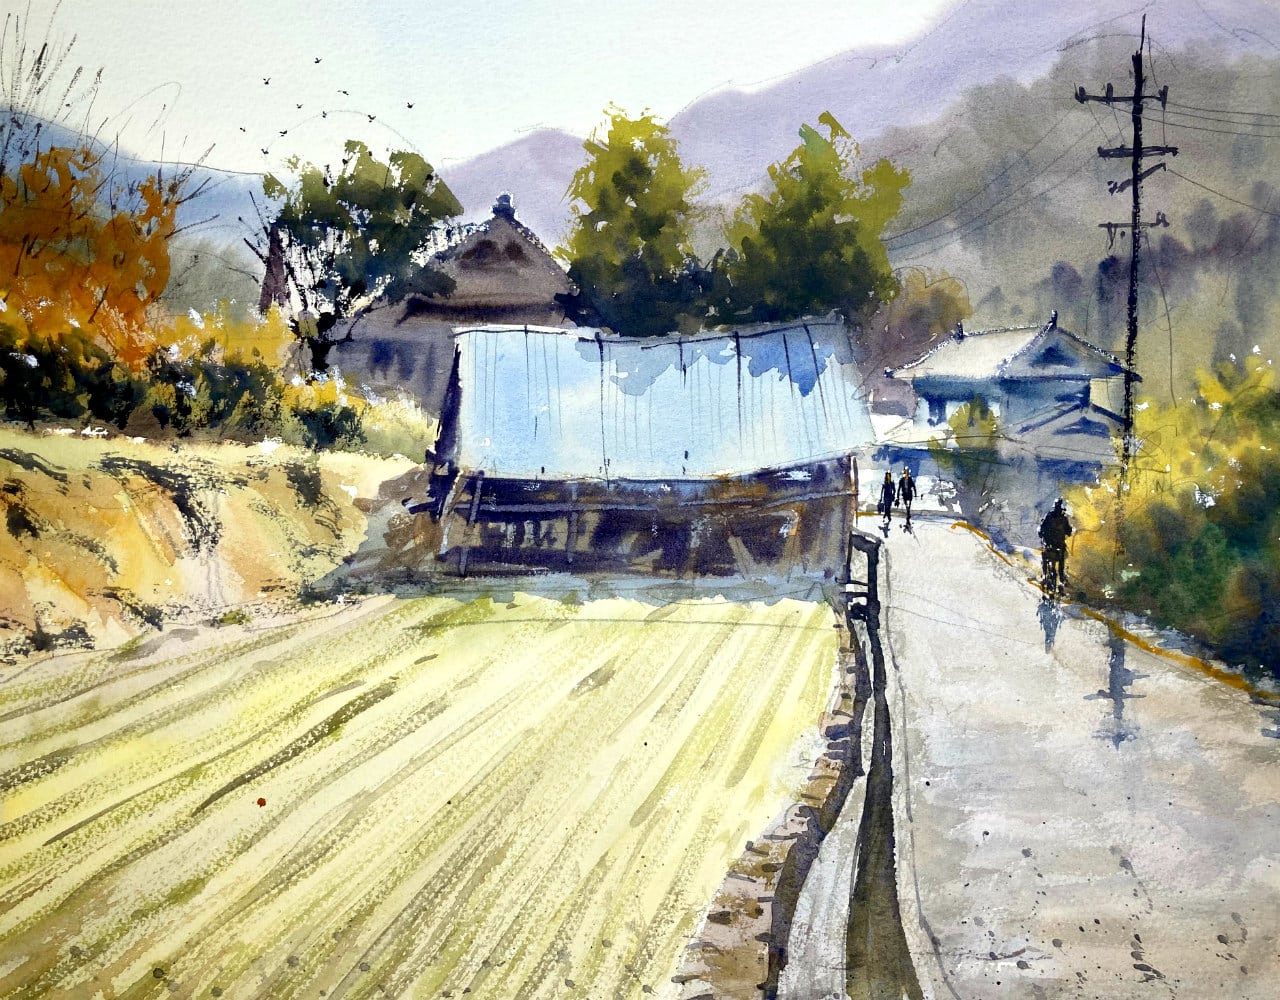 Paintings of an old shed and barn in a small, rural Japanese town called Shonai